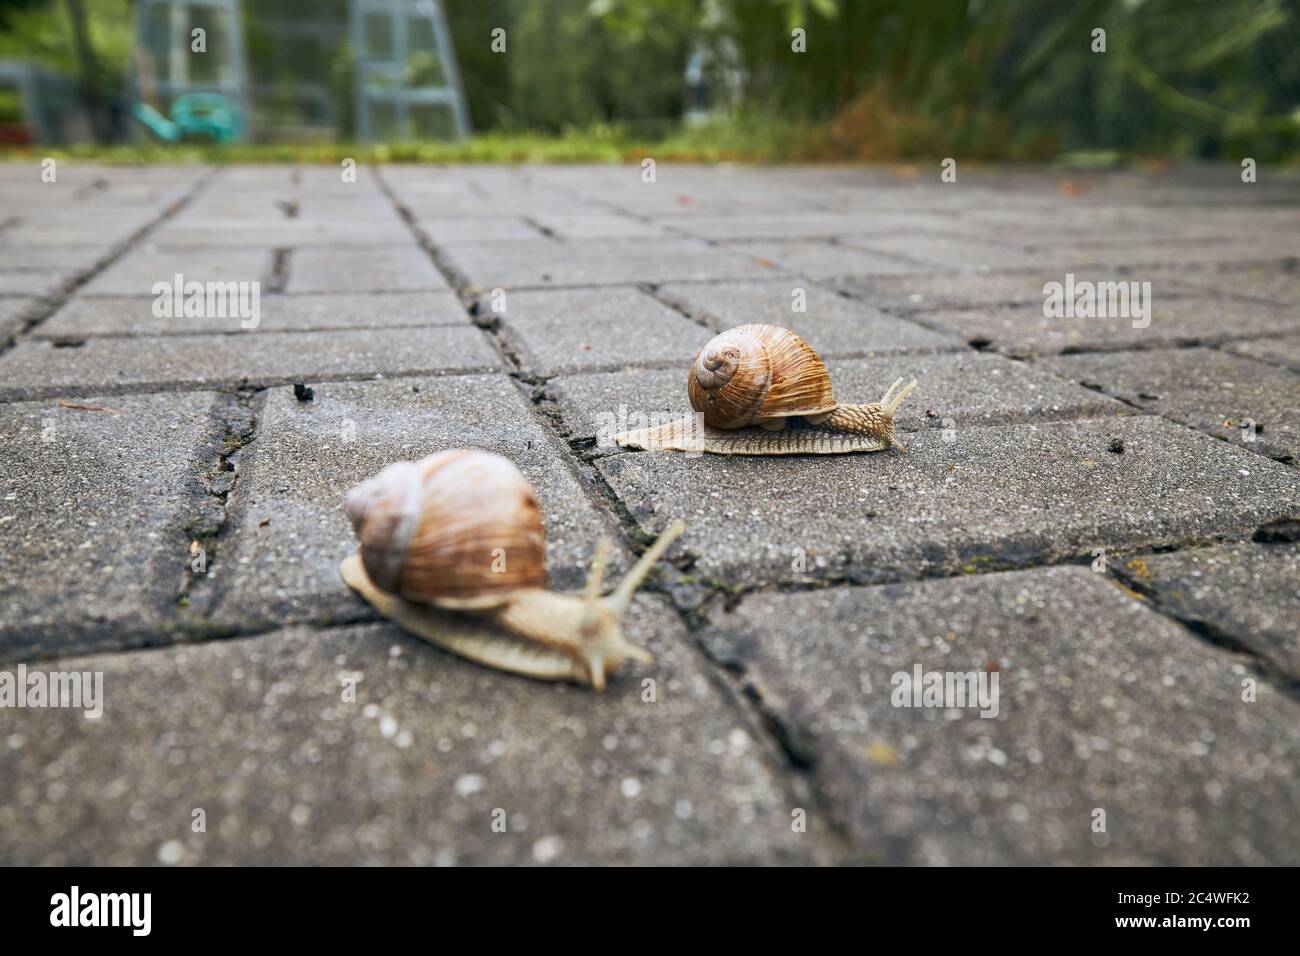 Close-up of two crawling snails on pavement in garden. Stock Photo